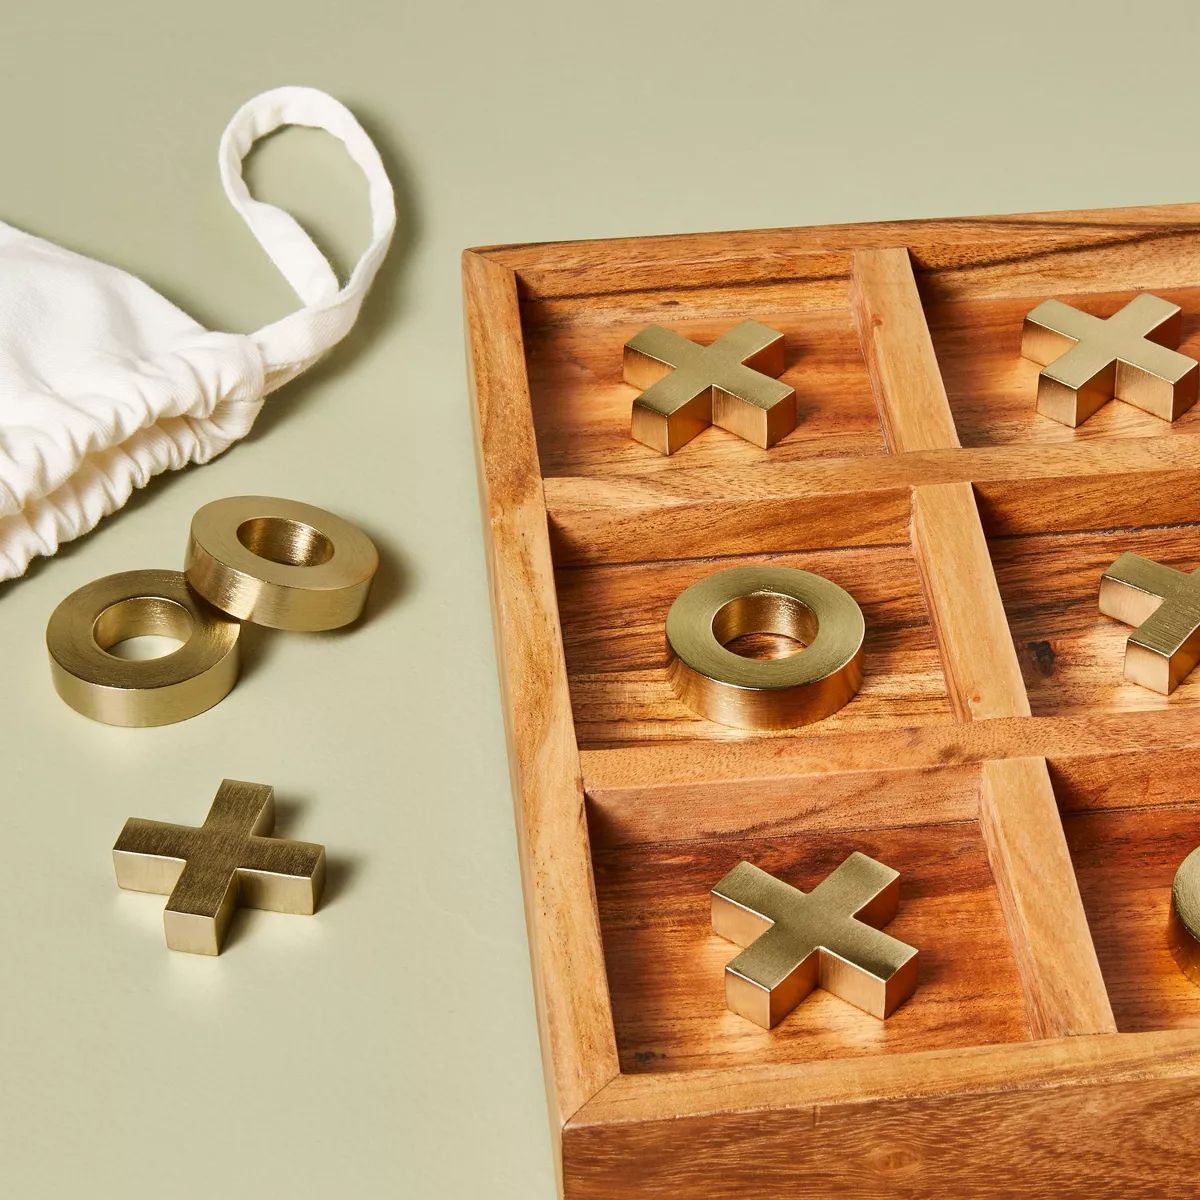 Brass and Wood Tic-Tac-Toe Game - 10pc - Hearth & Hand™ with Magnolia | Target